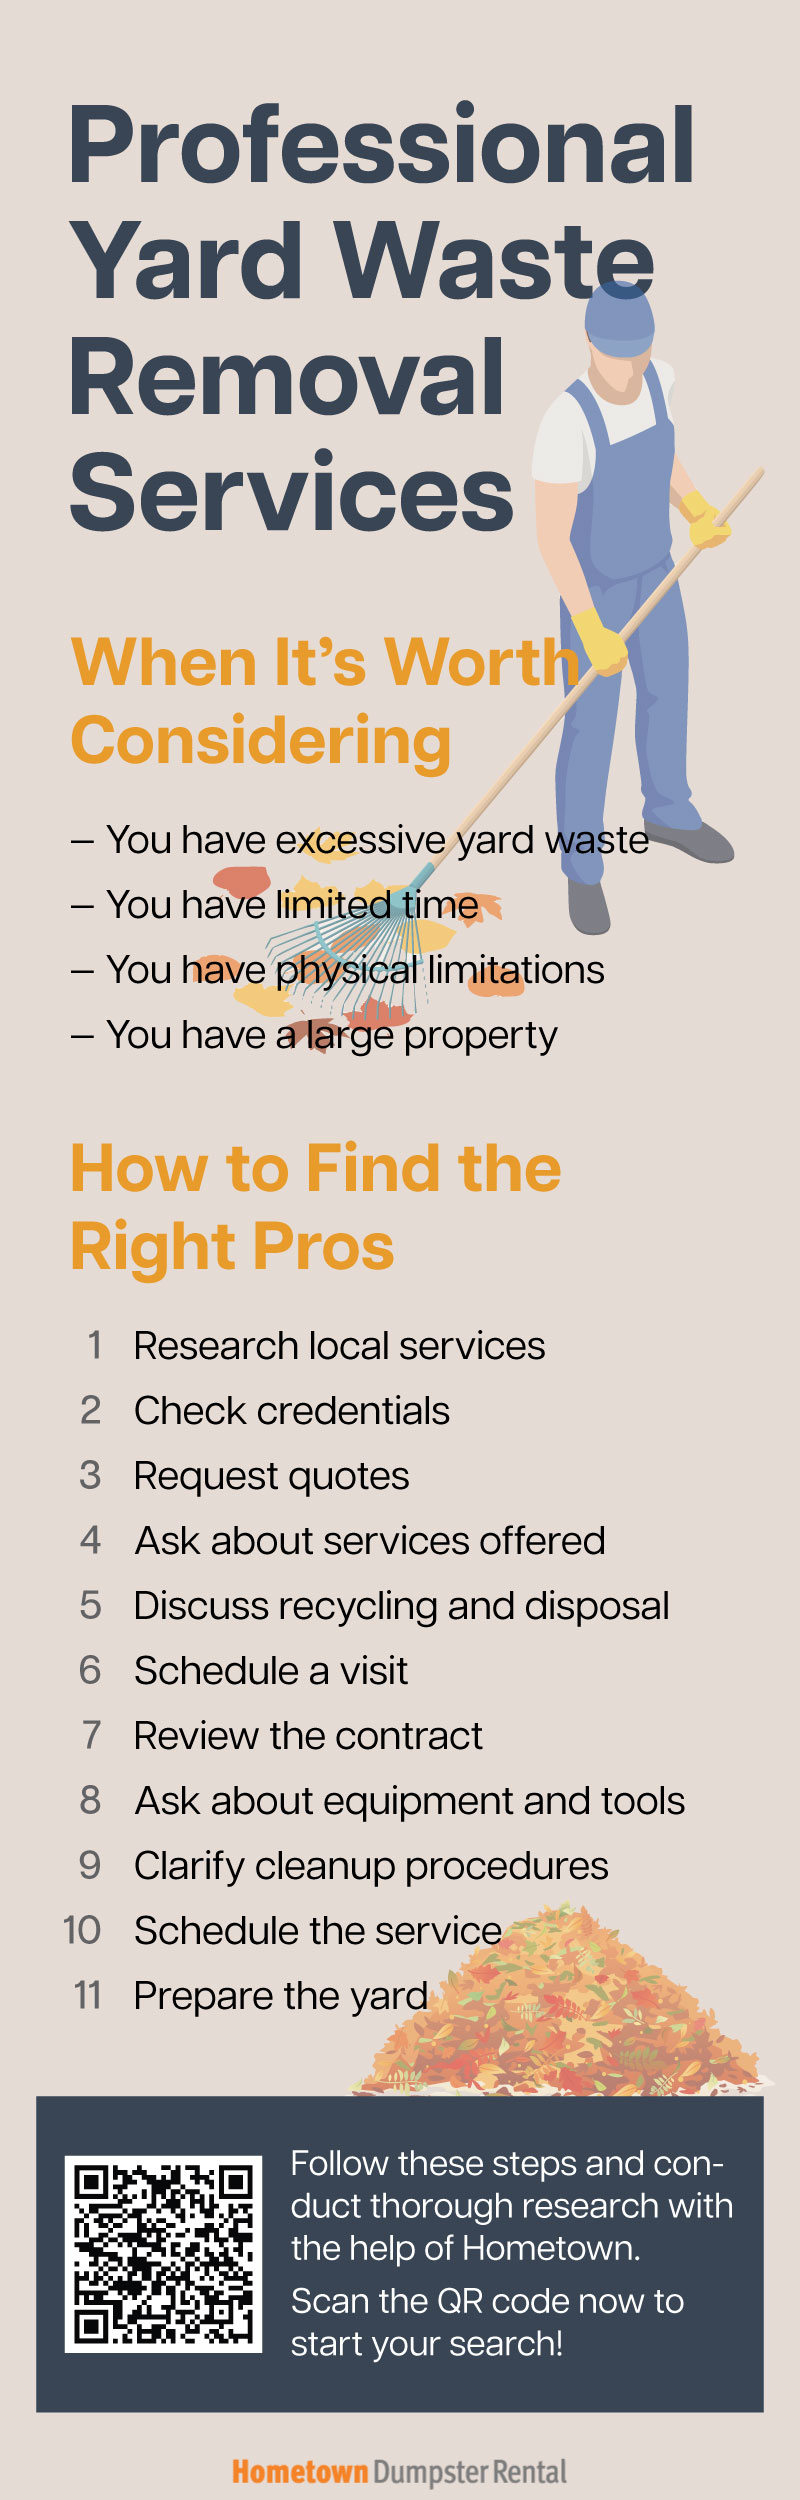 yard waste removal services infographic